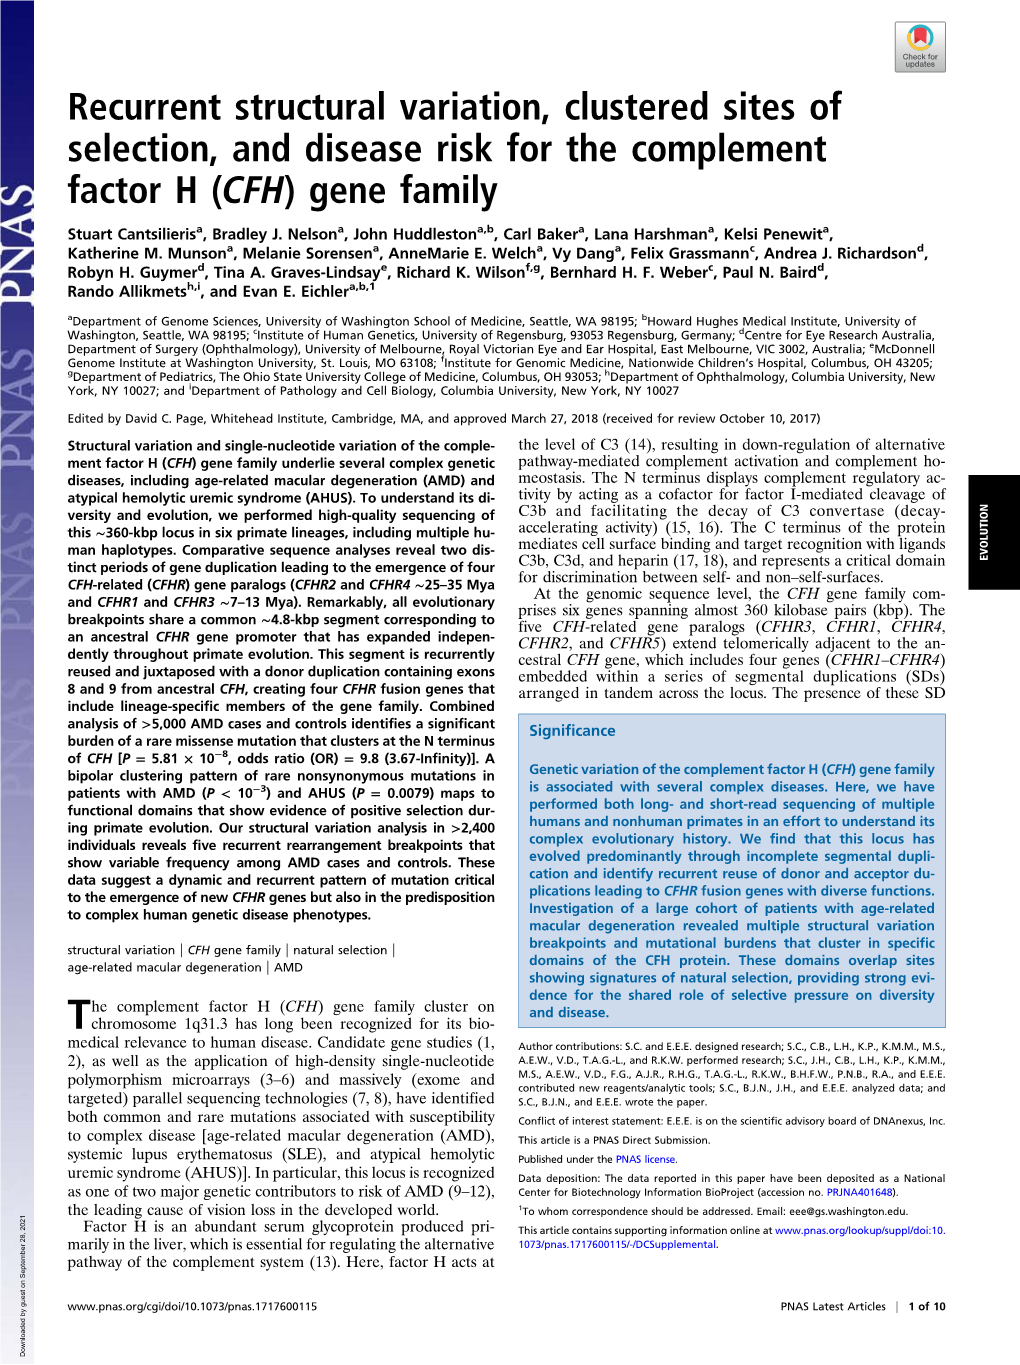 Recurrent Structural Variation, Clustered Sites of Selection, and Disease Risk for the Complement Factor H (CFH) Gene Family